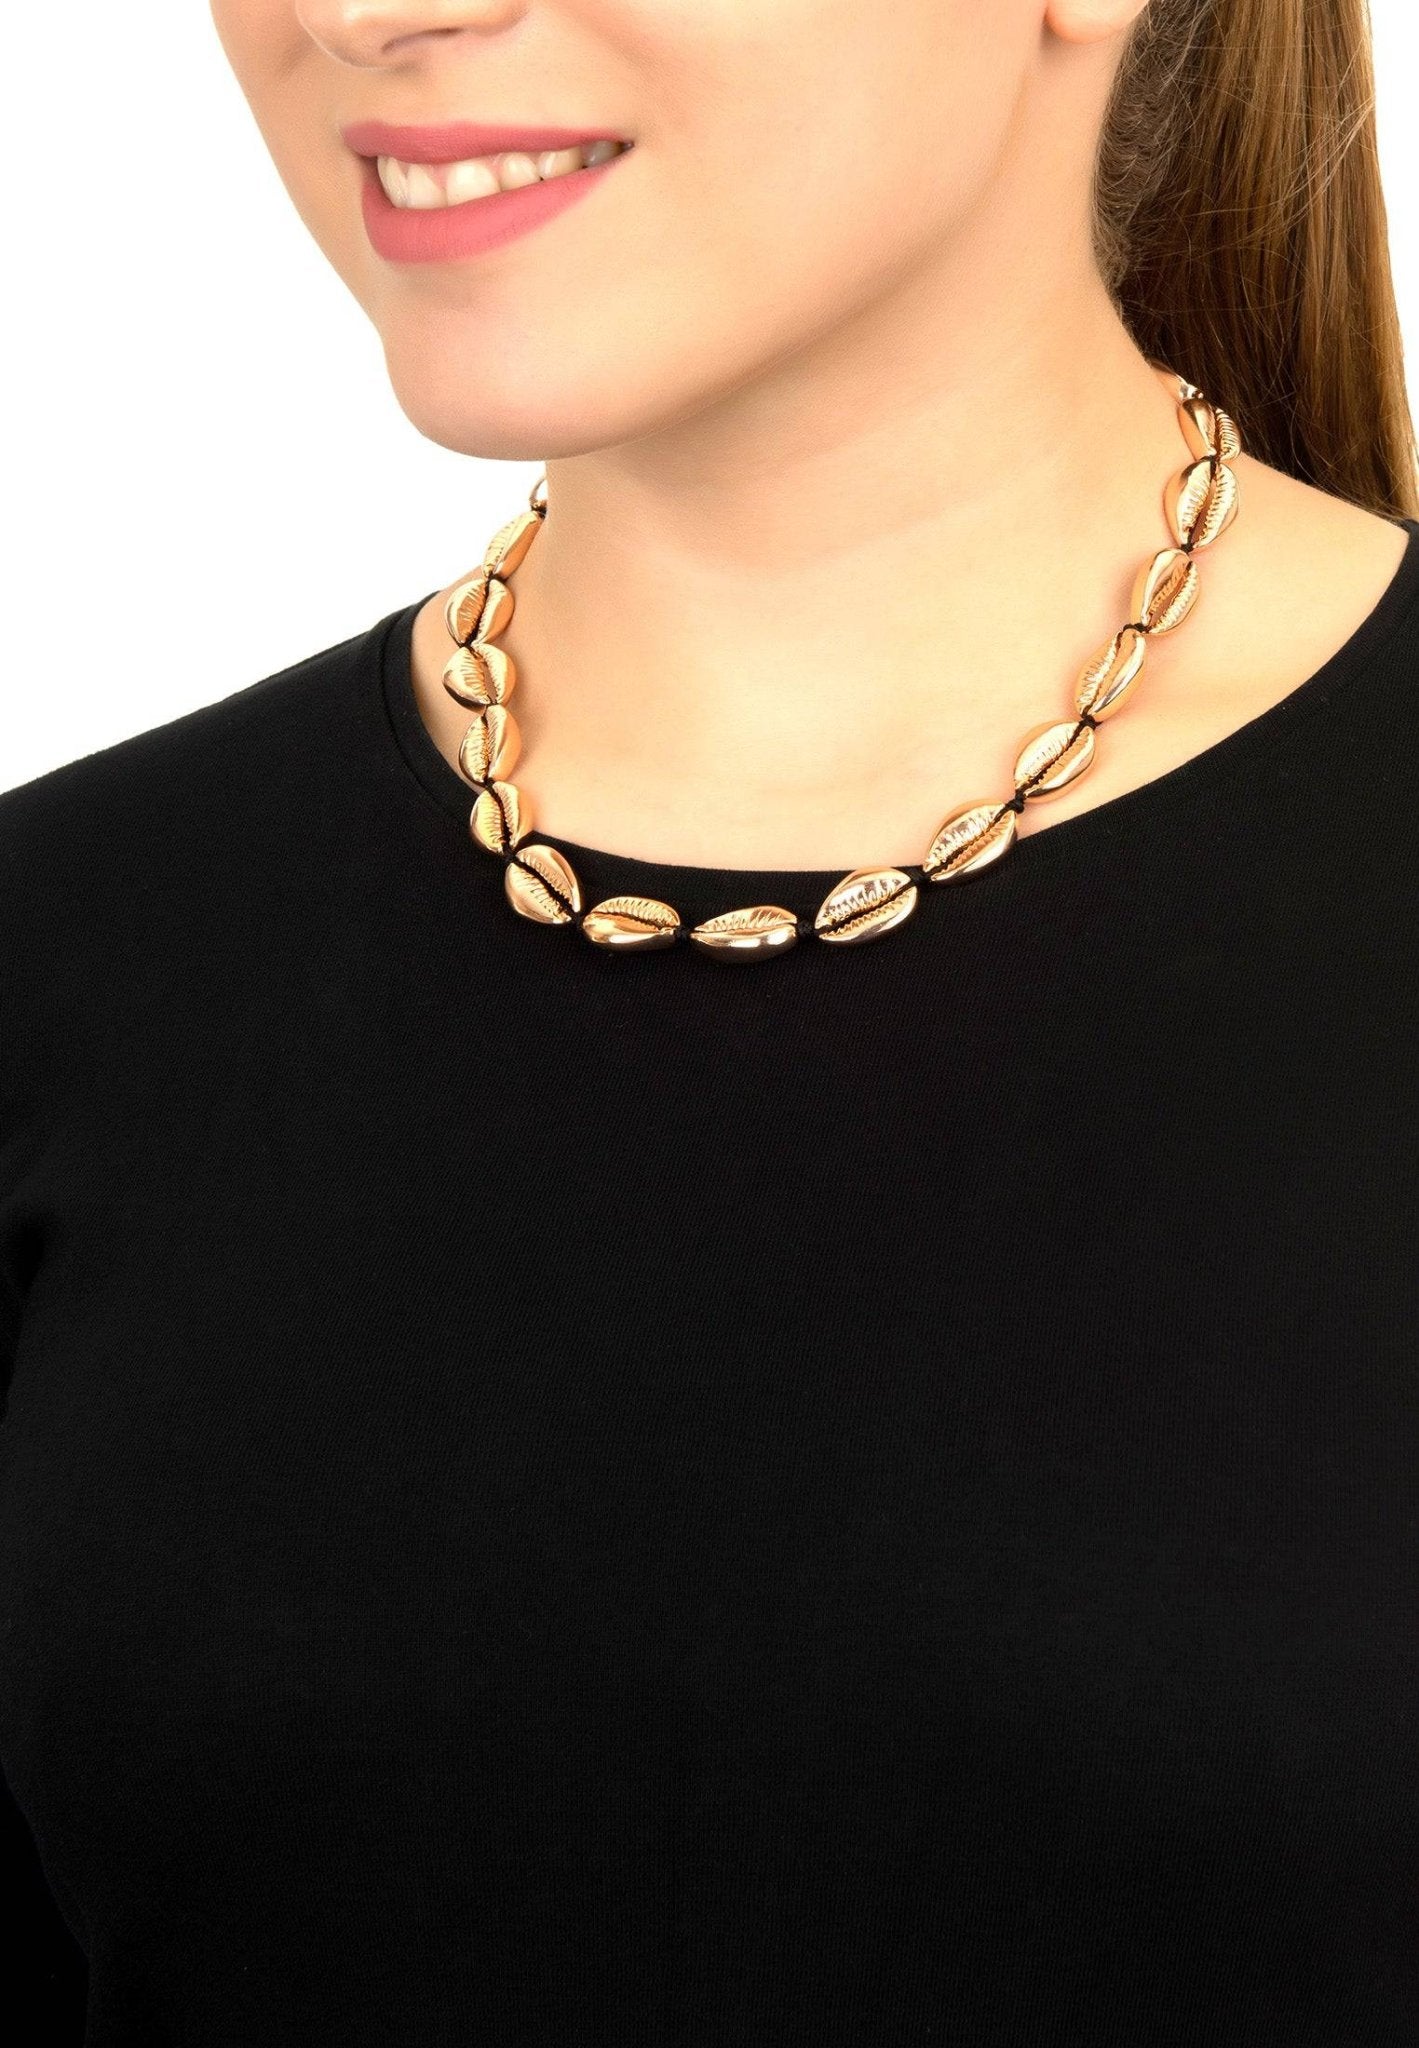 Cowrie Shell Choker Strand Necklace Rose Gold - LATELITA Necklaces